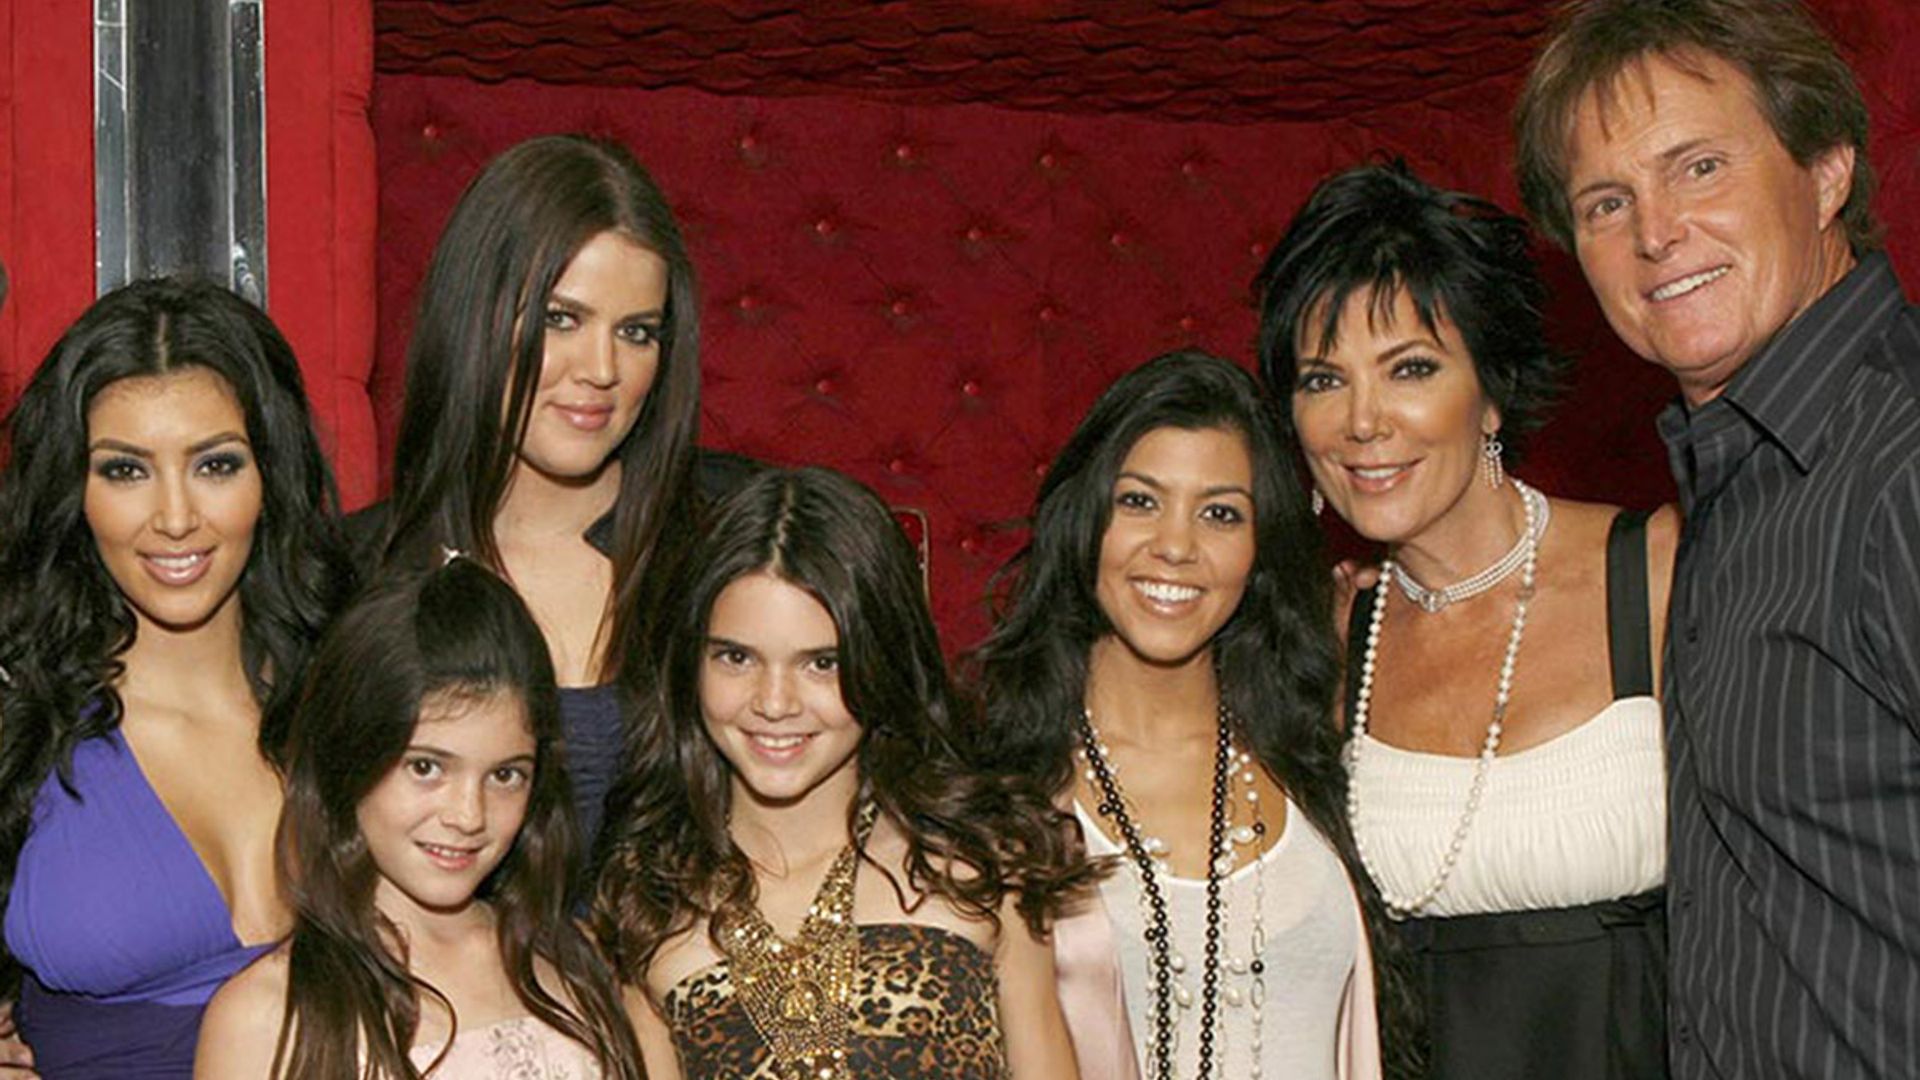 Keeping Up with the Kardashians then vs now: see how Kim, Khloe, Kylie, Kourtney have changed ...